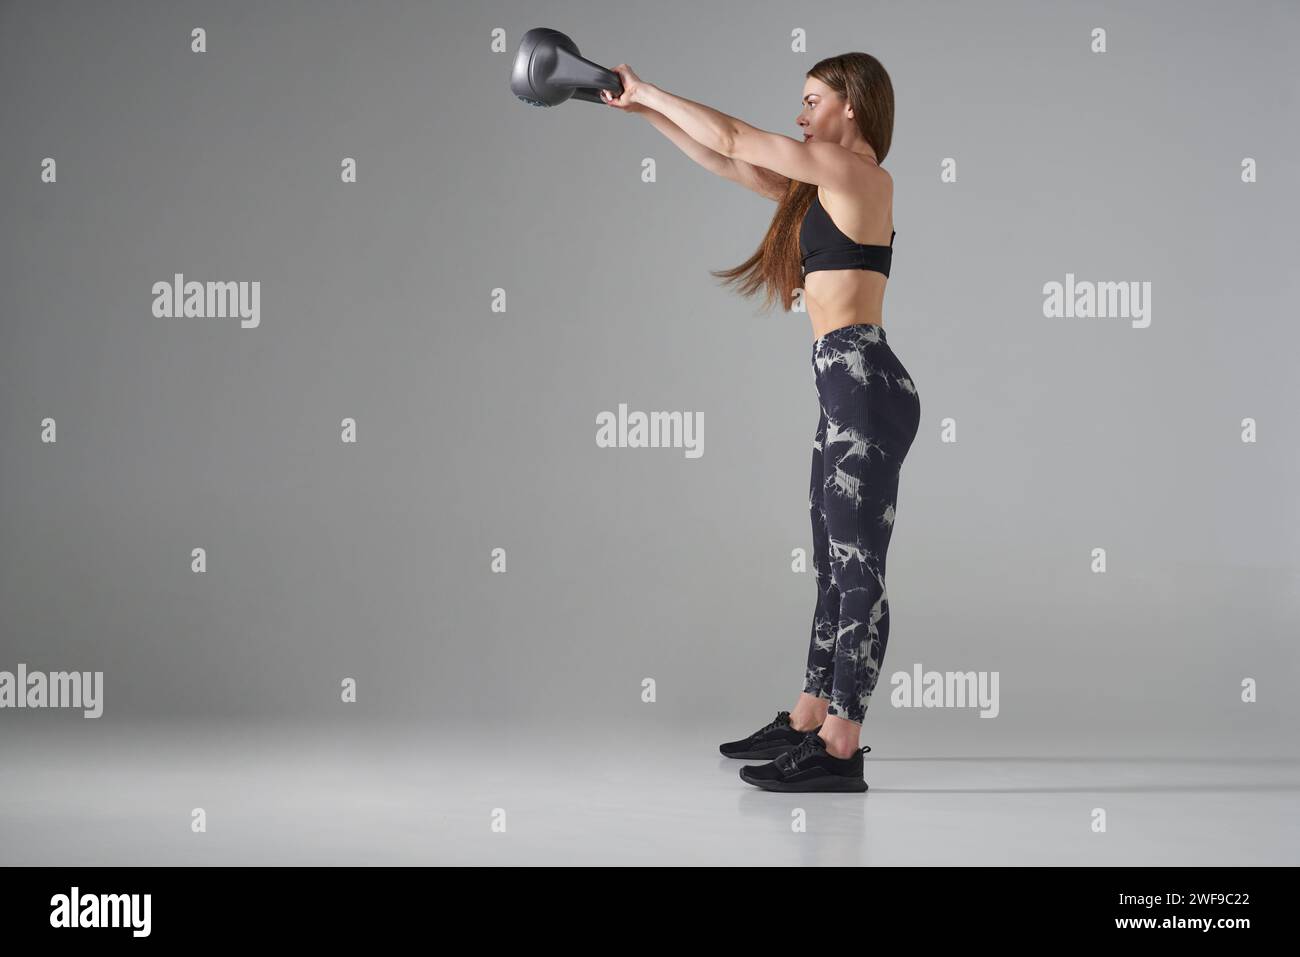 Motivated young sportswoman in legging, doing weight exercises with kettle bell. Side view of slim, muscular long-haired female lifting kettle bell an Stock Photo